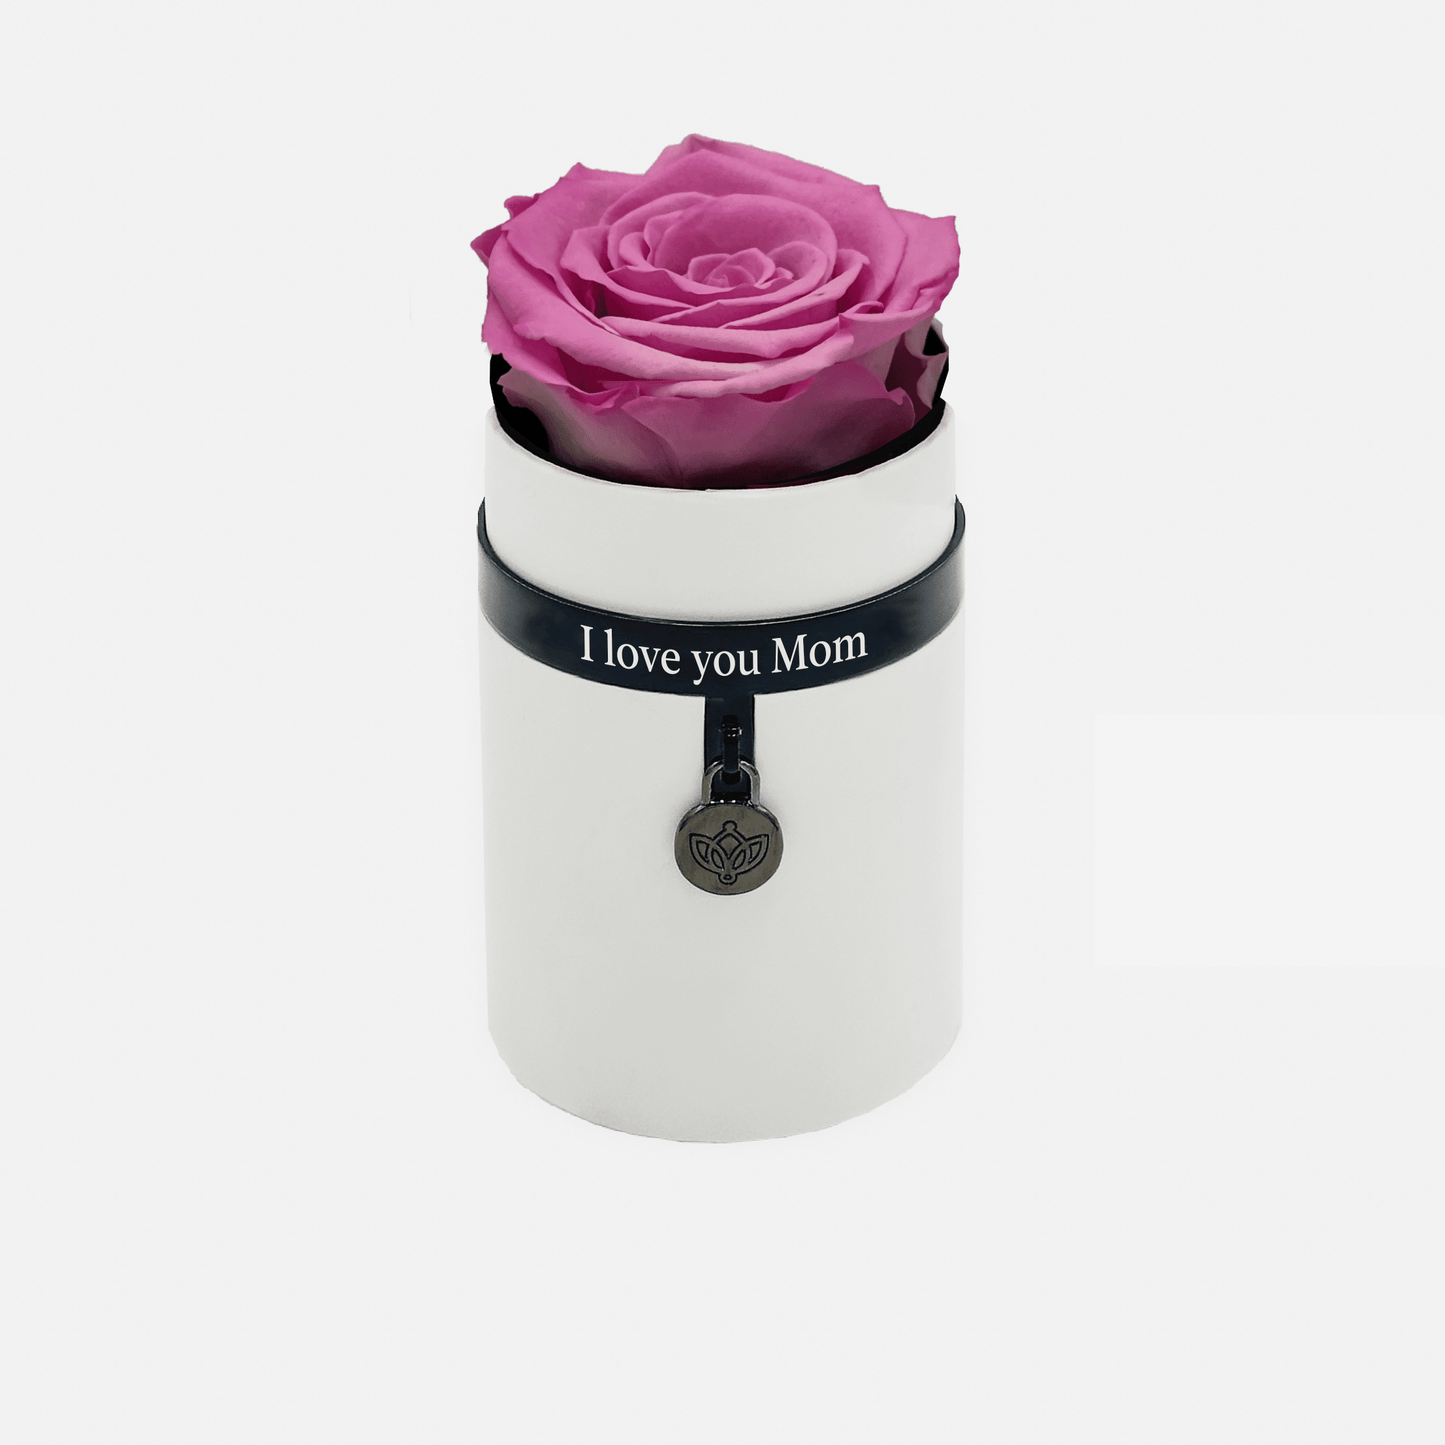 One in a Million™ Round Biely Box | I love you Mom | Candy Pink Rose